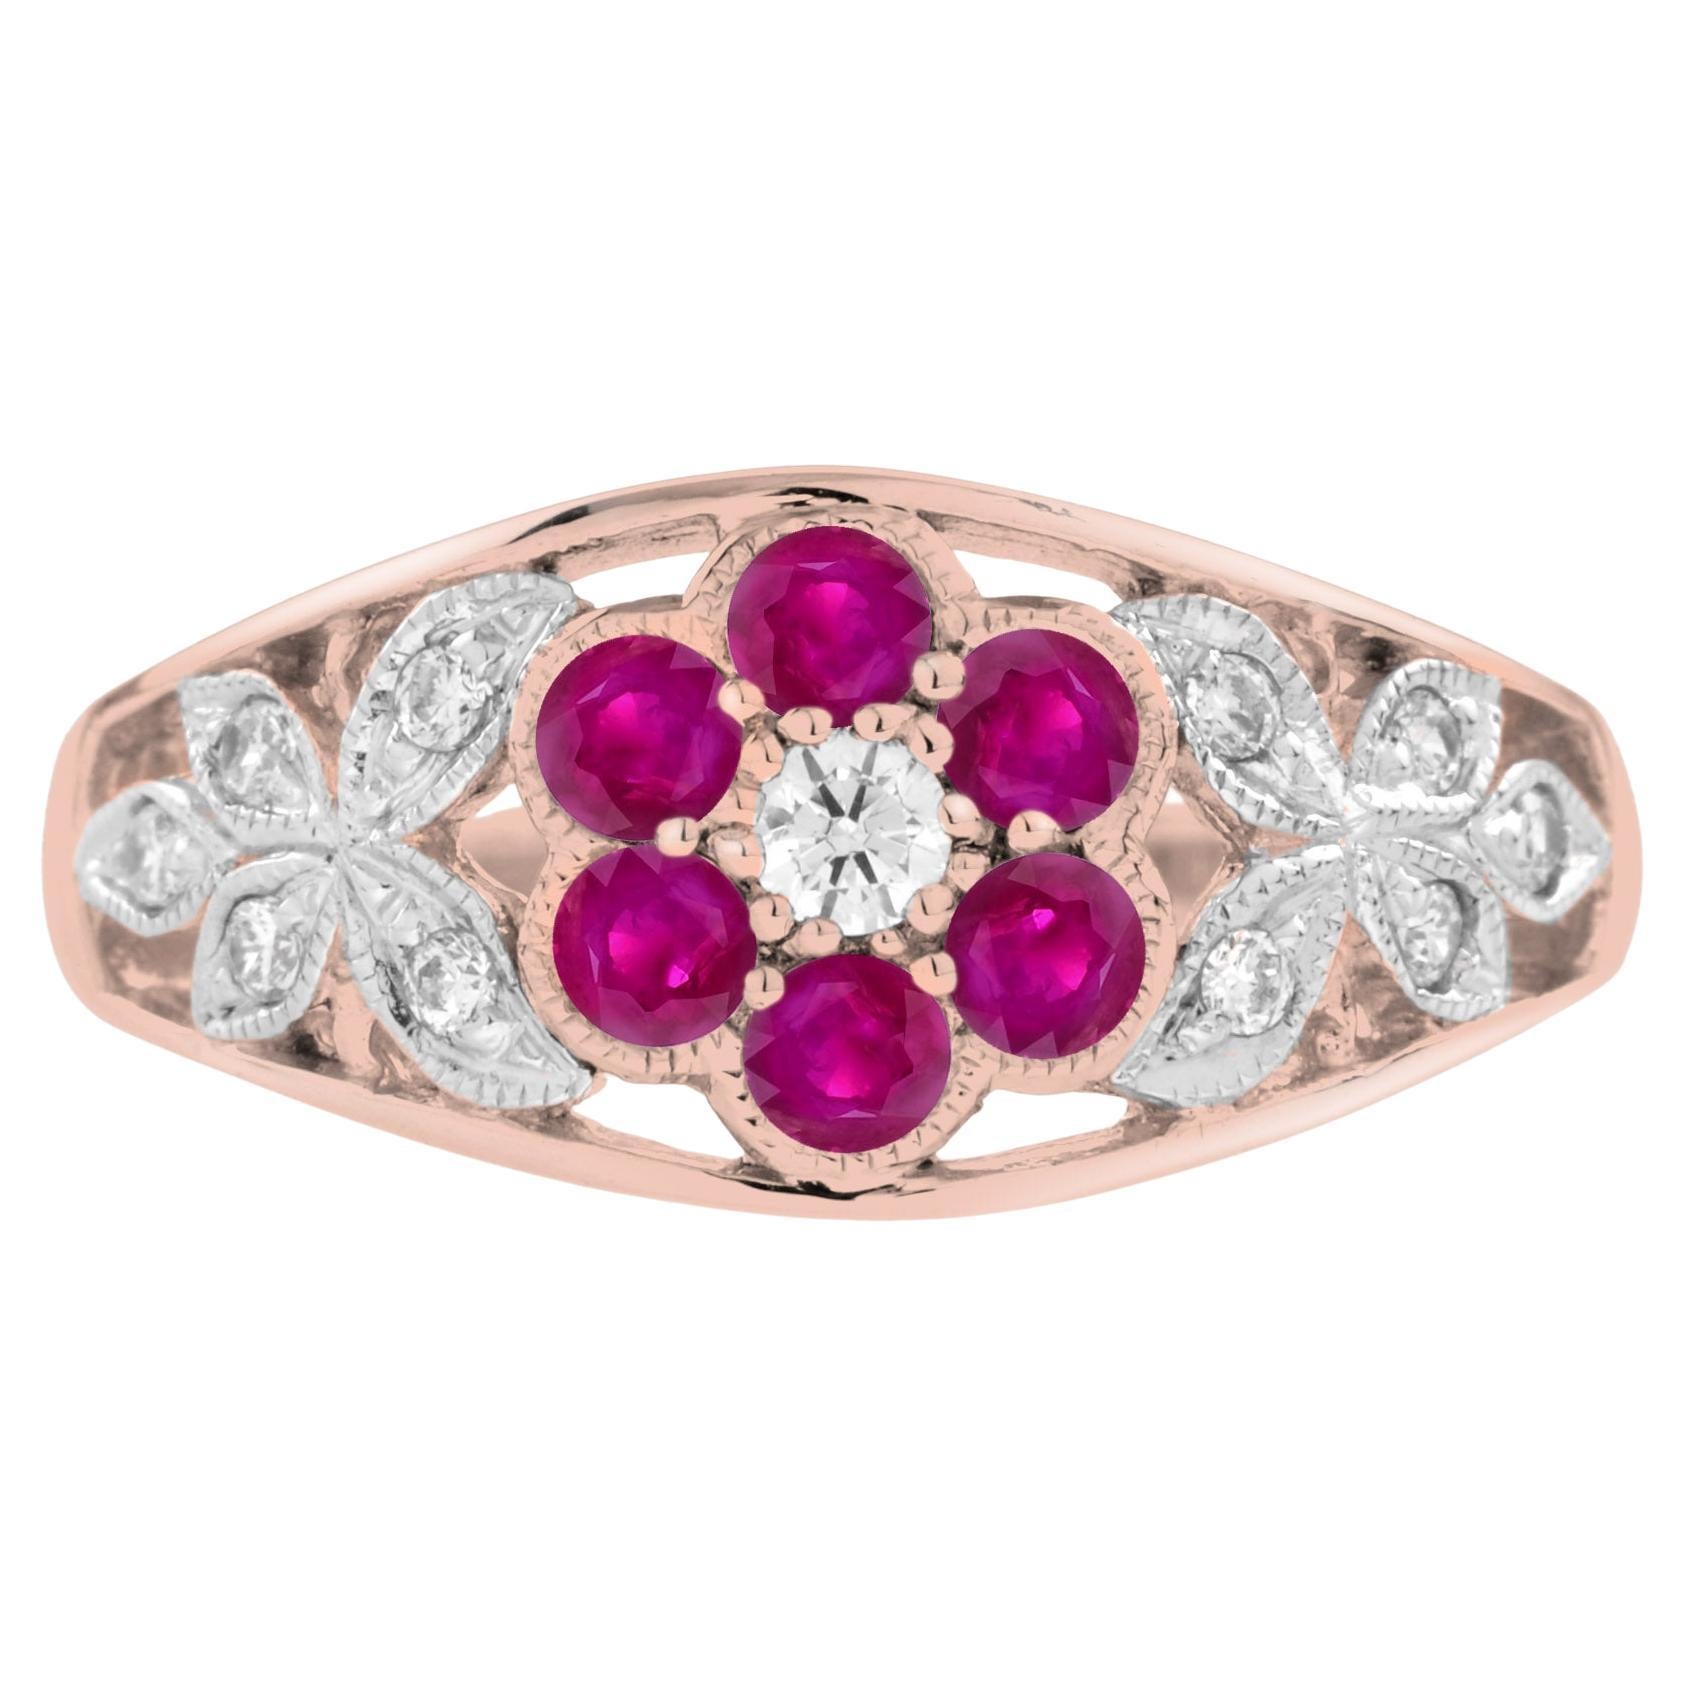 For Sale:  Diamond and Ruby Floral Cluster Engagement Ring in 14K Rose Gold